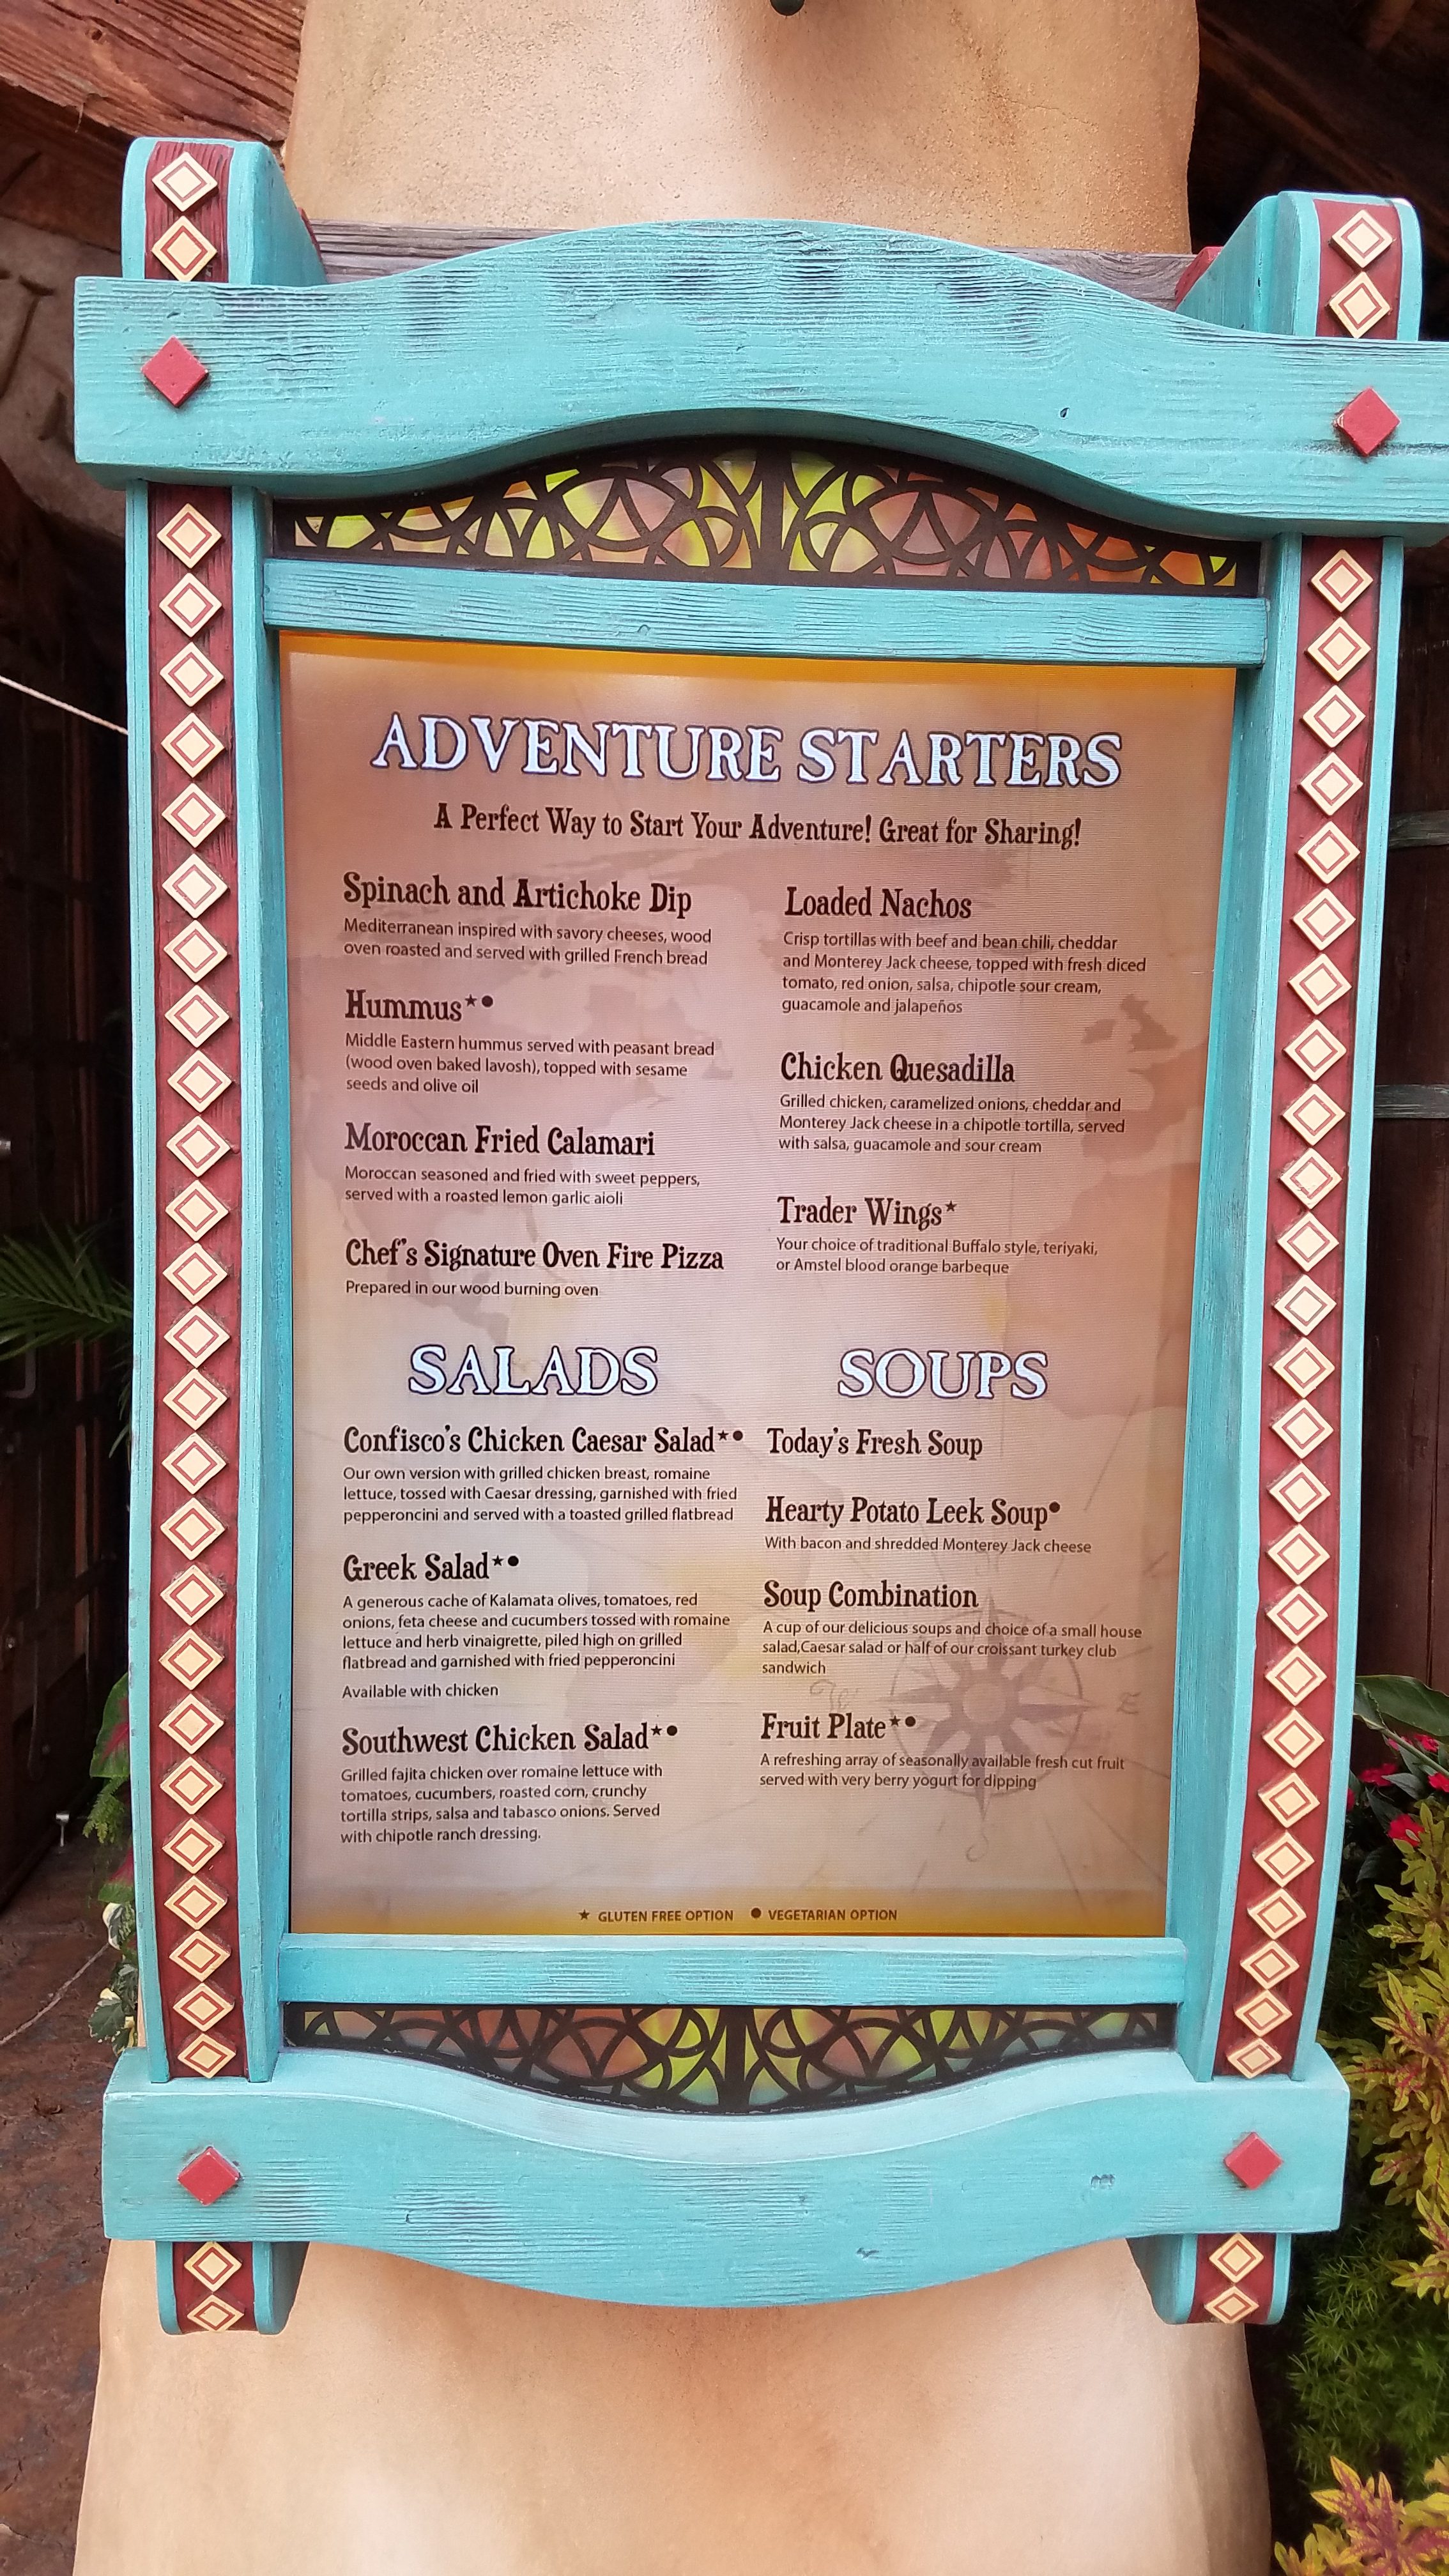 Menu at Confisco Grille - Dining Review - Islands of Adventure - Universal Orlando Resort - unofficialuniversal.com.